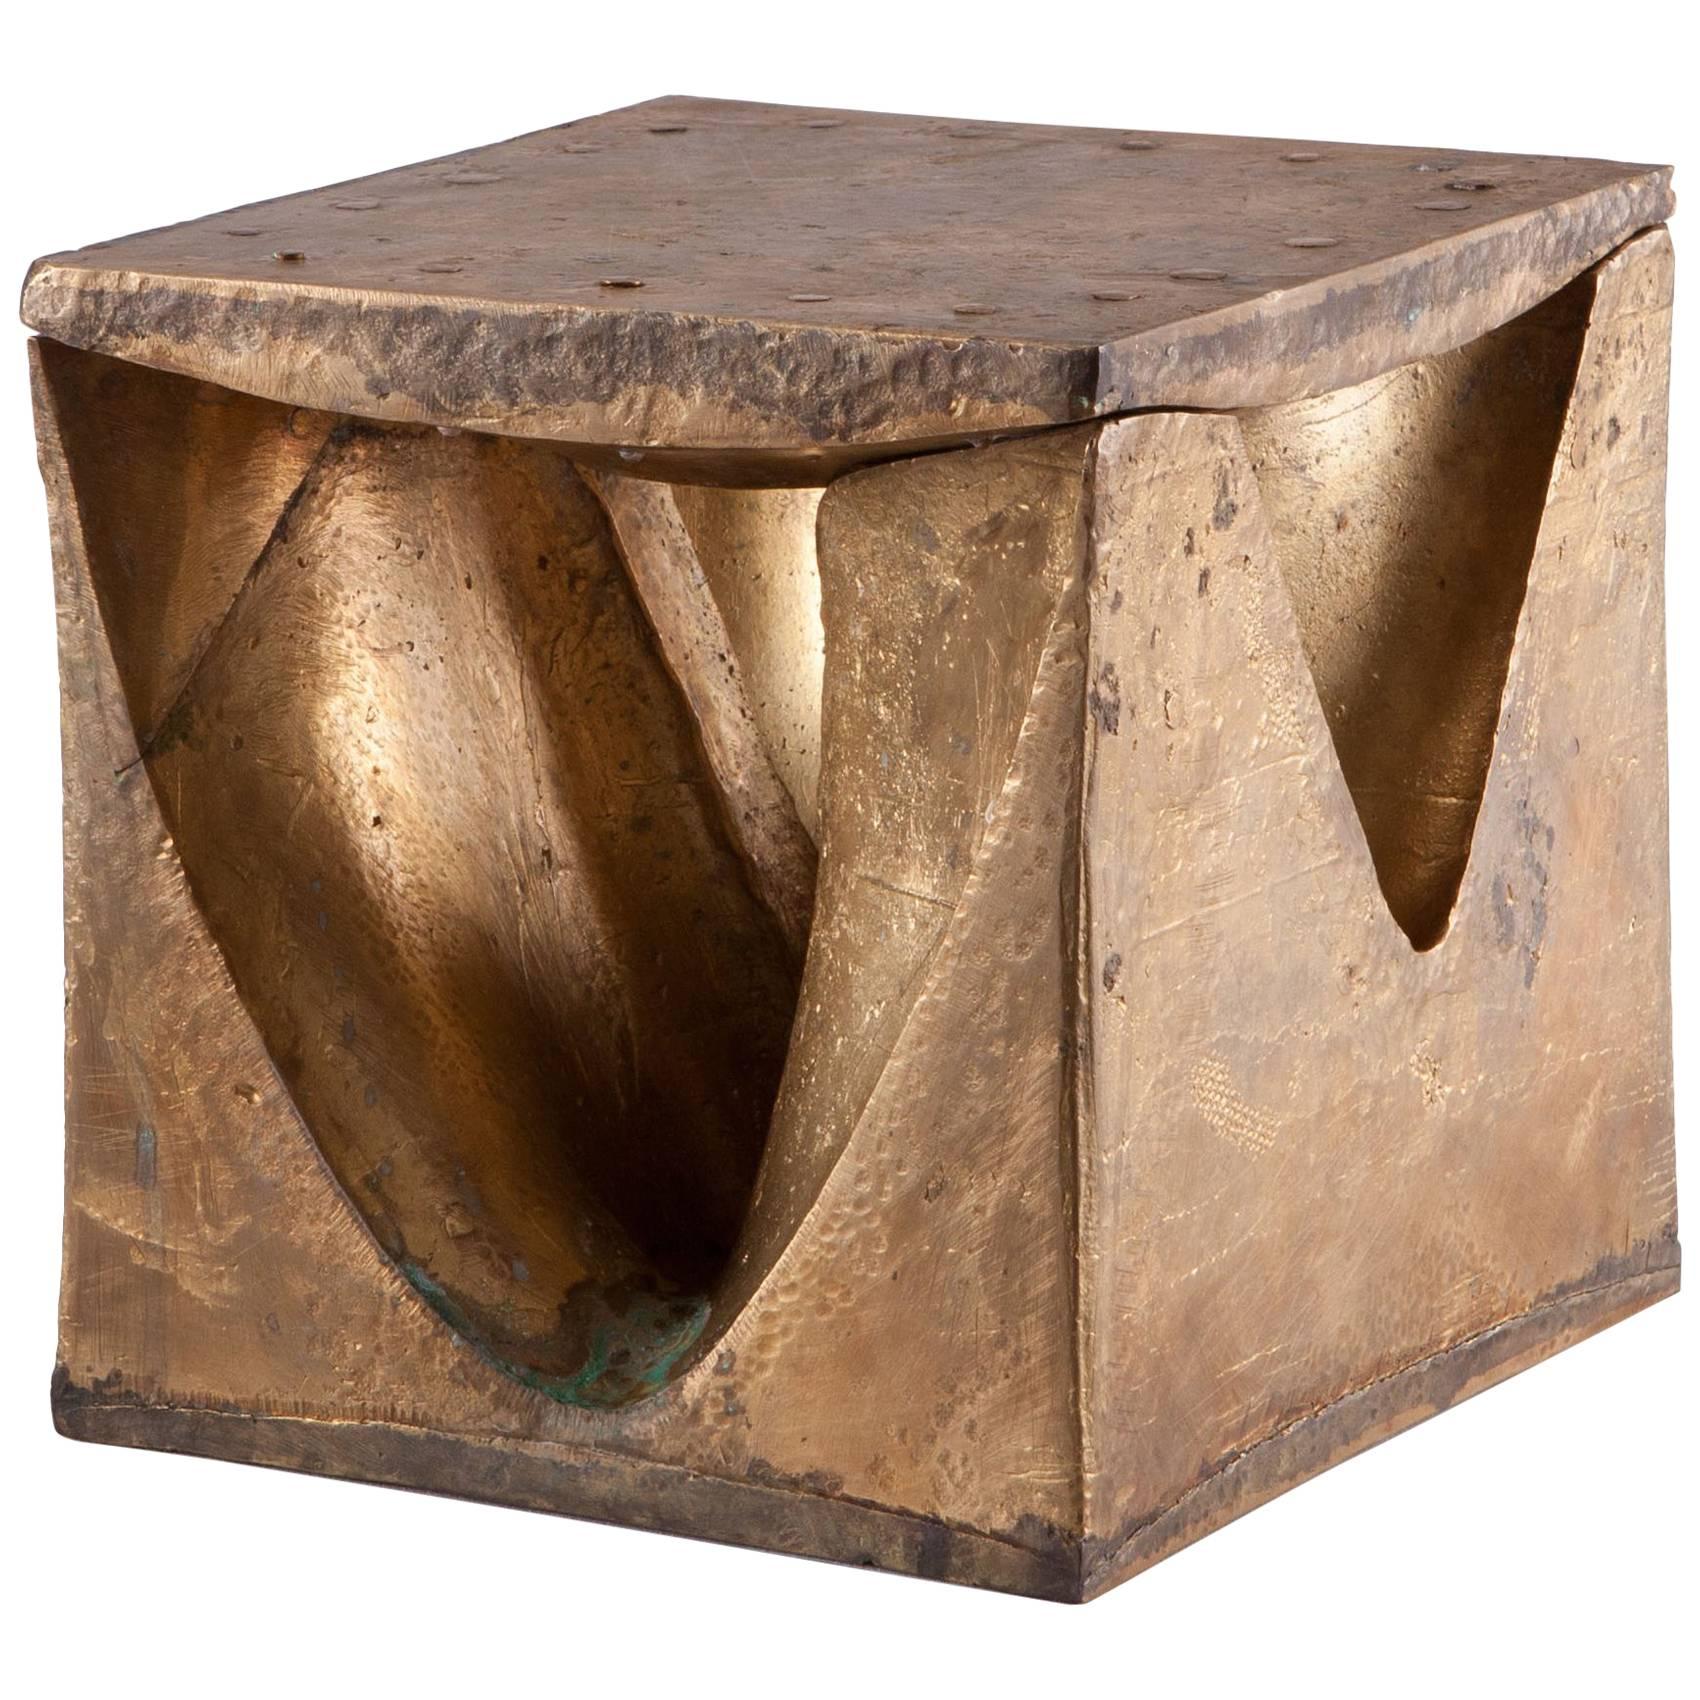 Solid Brass Cube Shaped Puzzle / Artwork For Sale